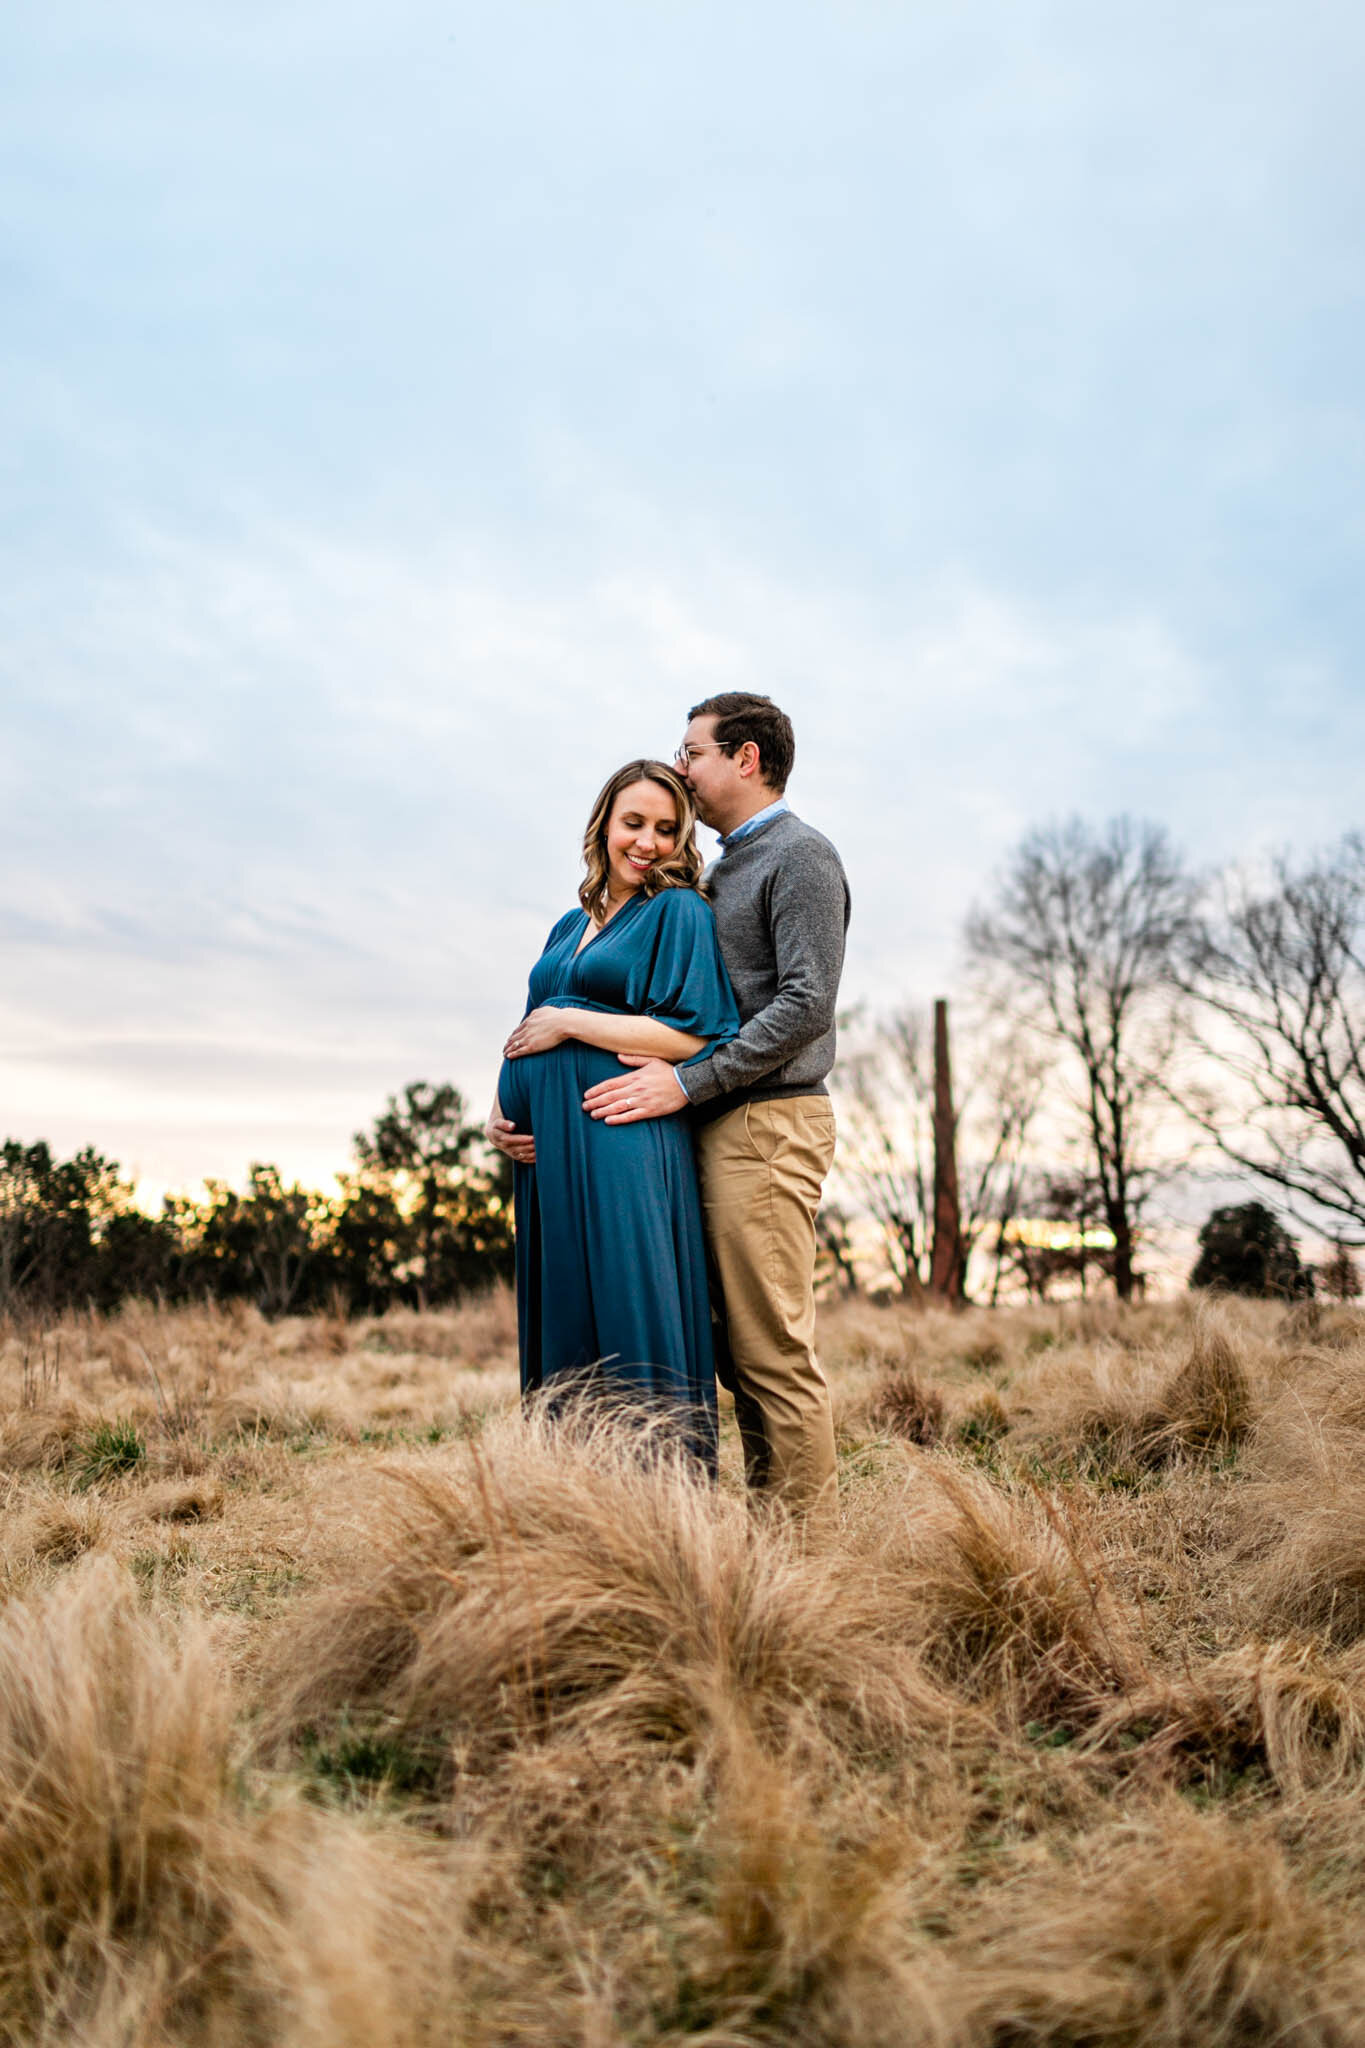 Raleigh Newborn Photographer | By G. Lin Photography | Artistic portrait of woman and man standing in open field